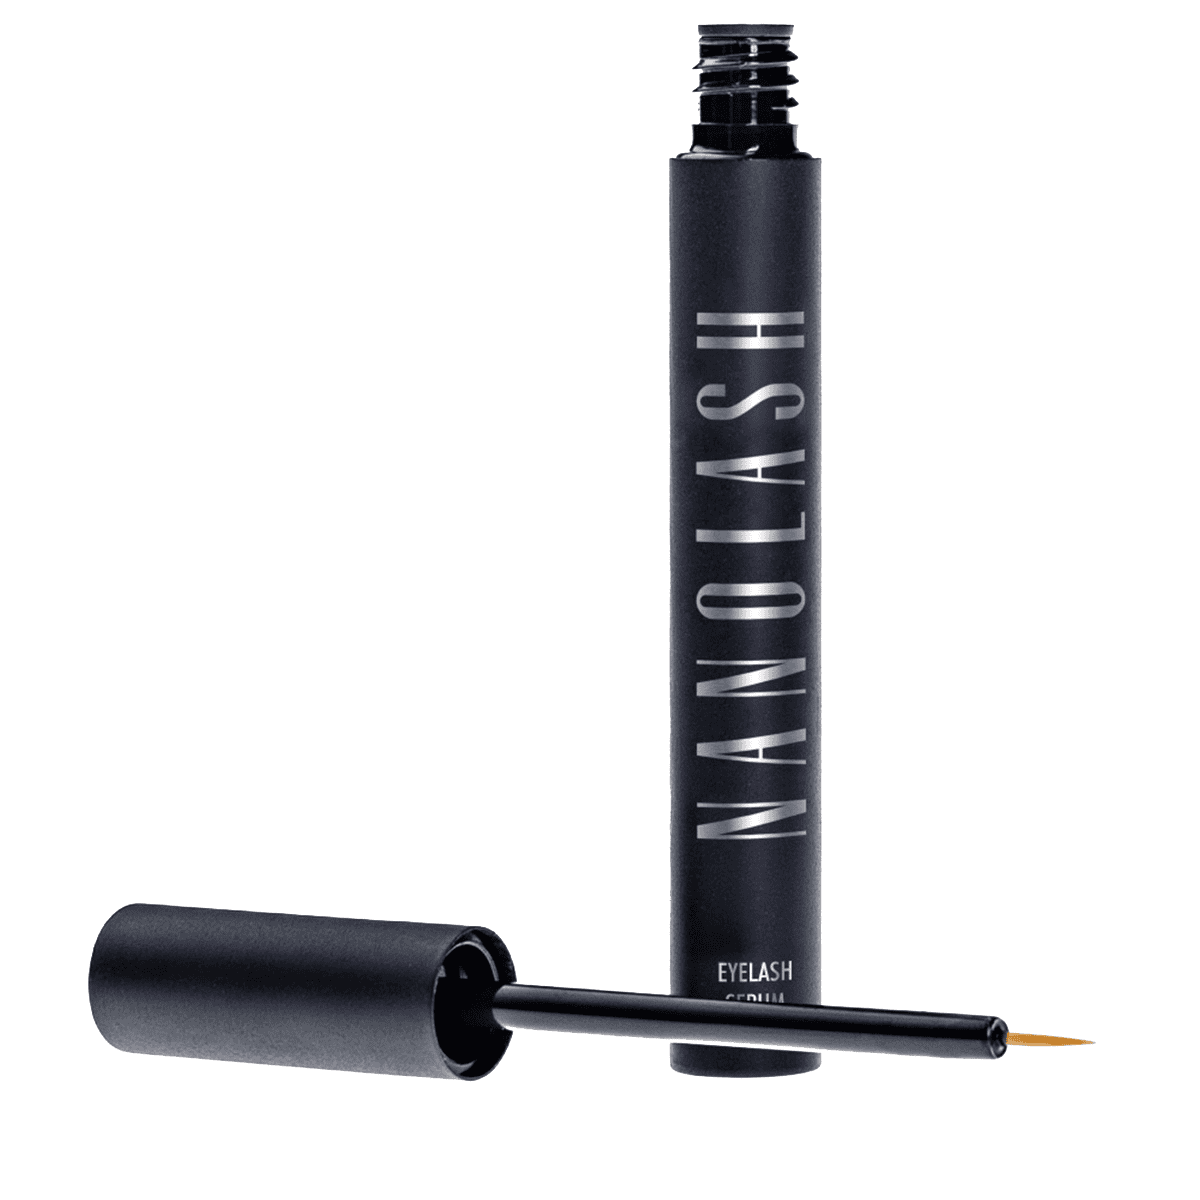 Nanolash - cosmetics, accessories for eyelash care and styling